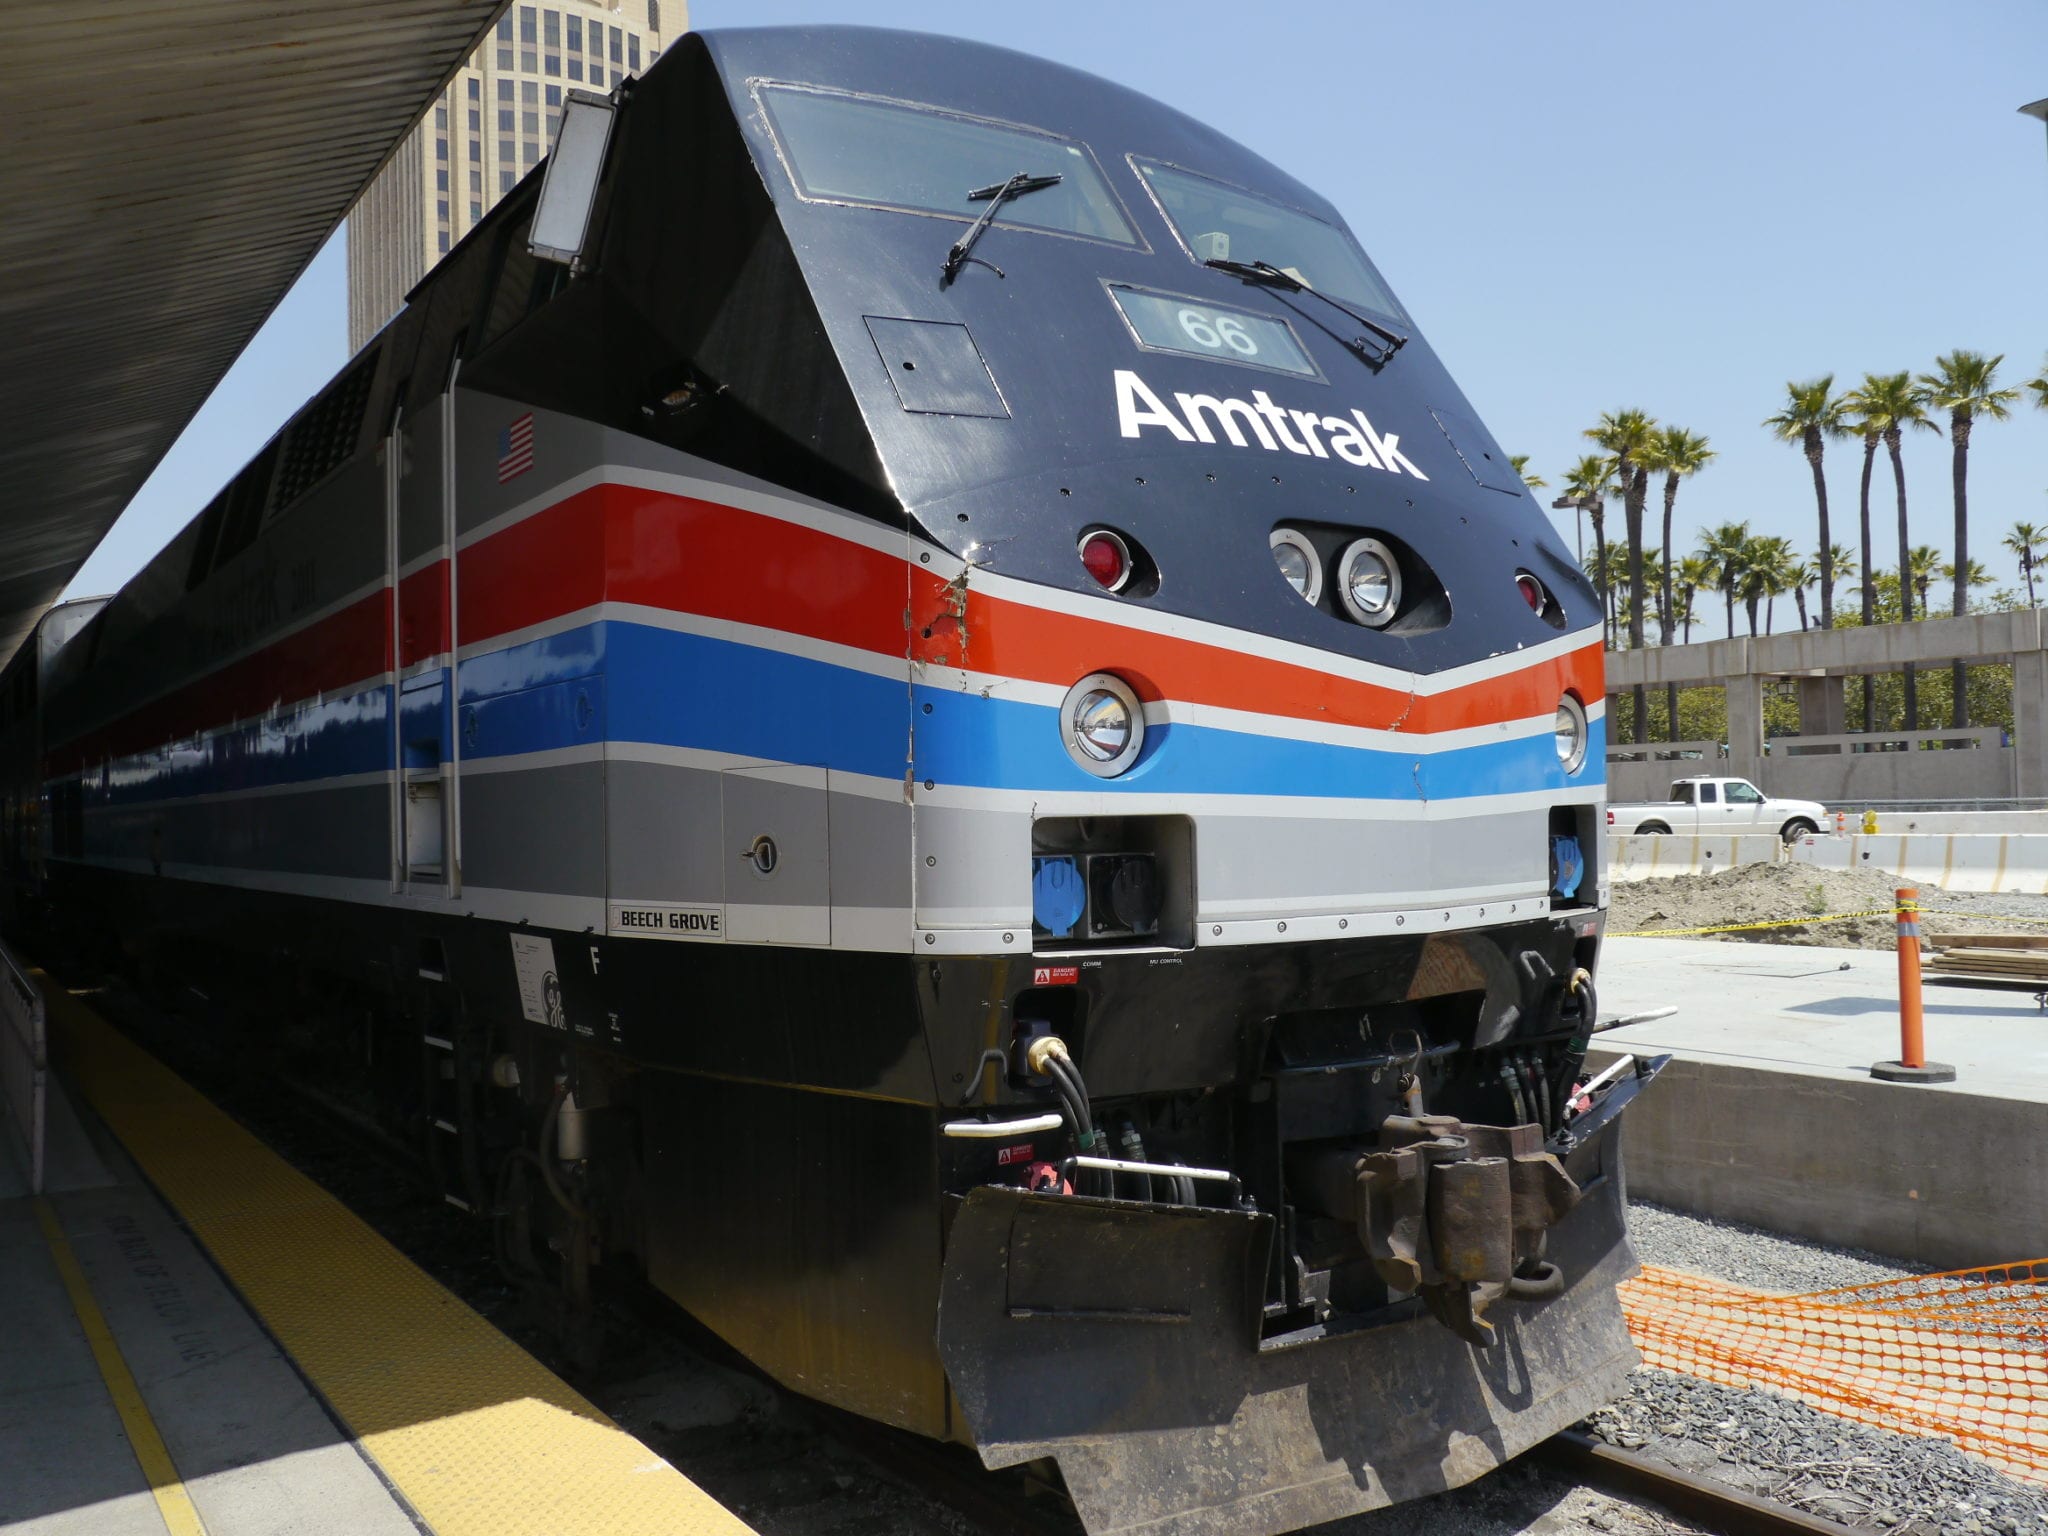 Improving the ‘Amtrak experience’